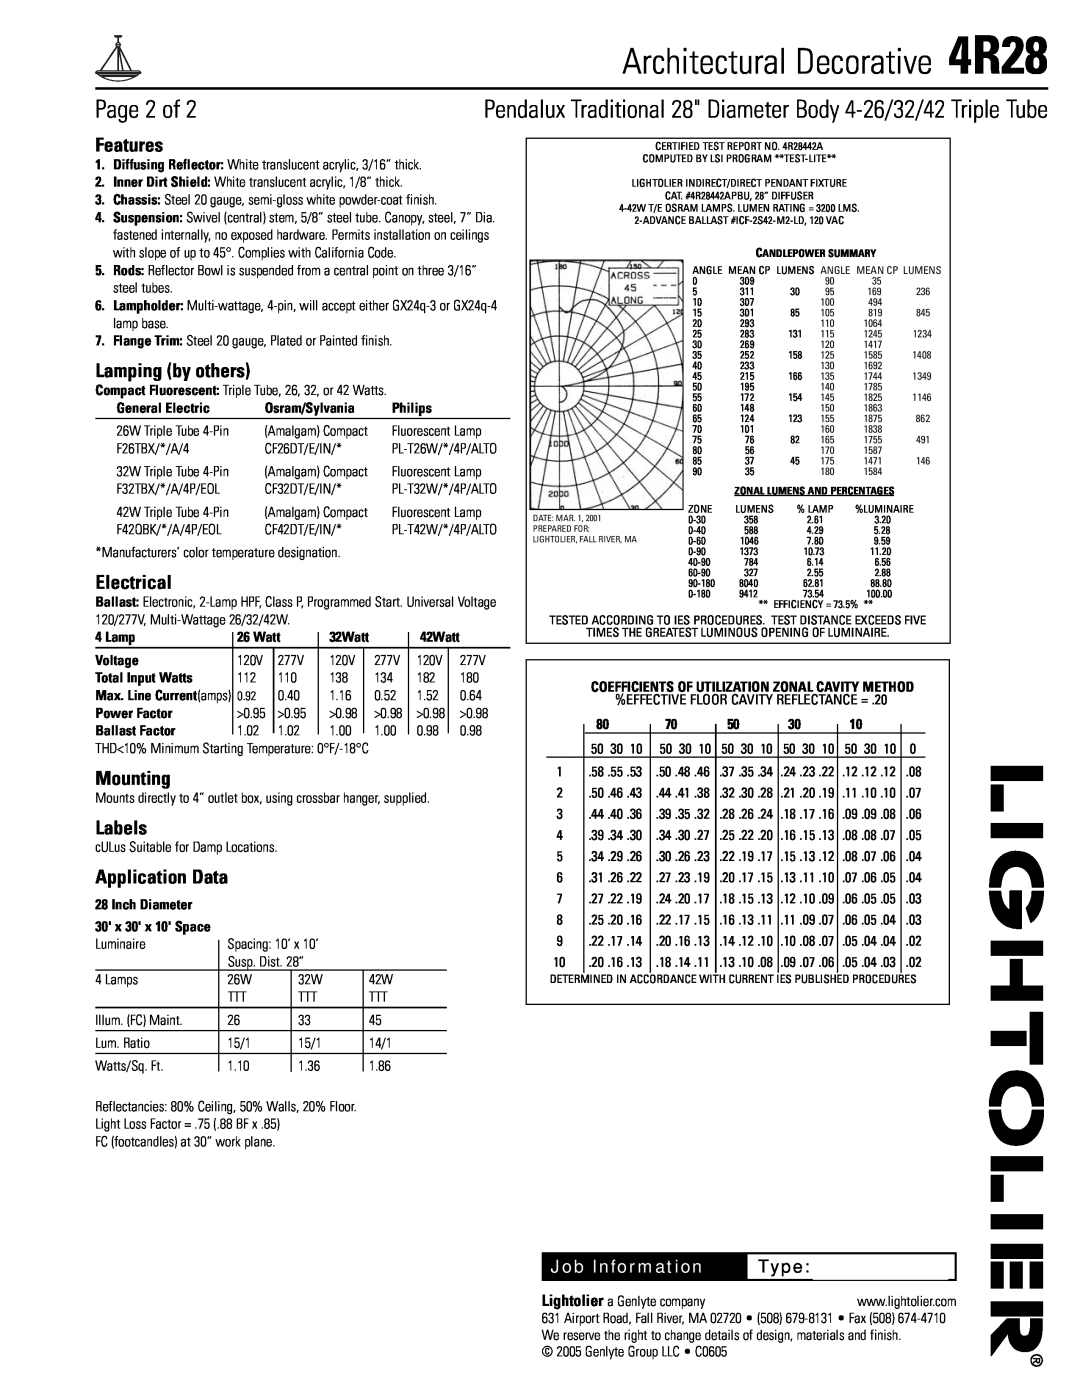 Lightolier 4R28 specifications Page 2 of, Features, Lamping by others, Electrical, Mounting, Labels, Application Data, Type 